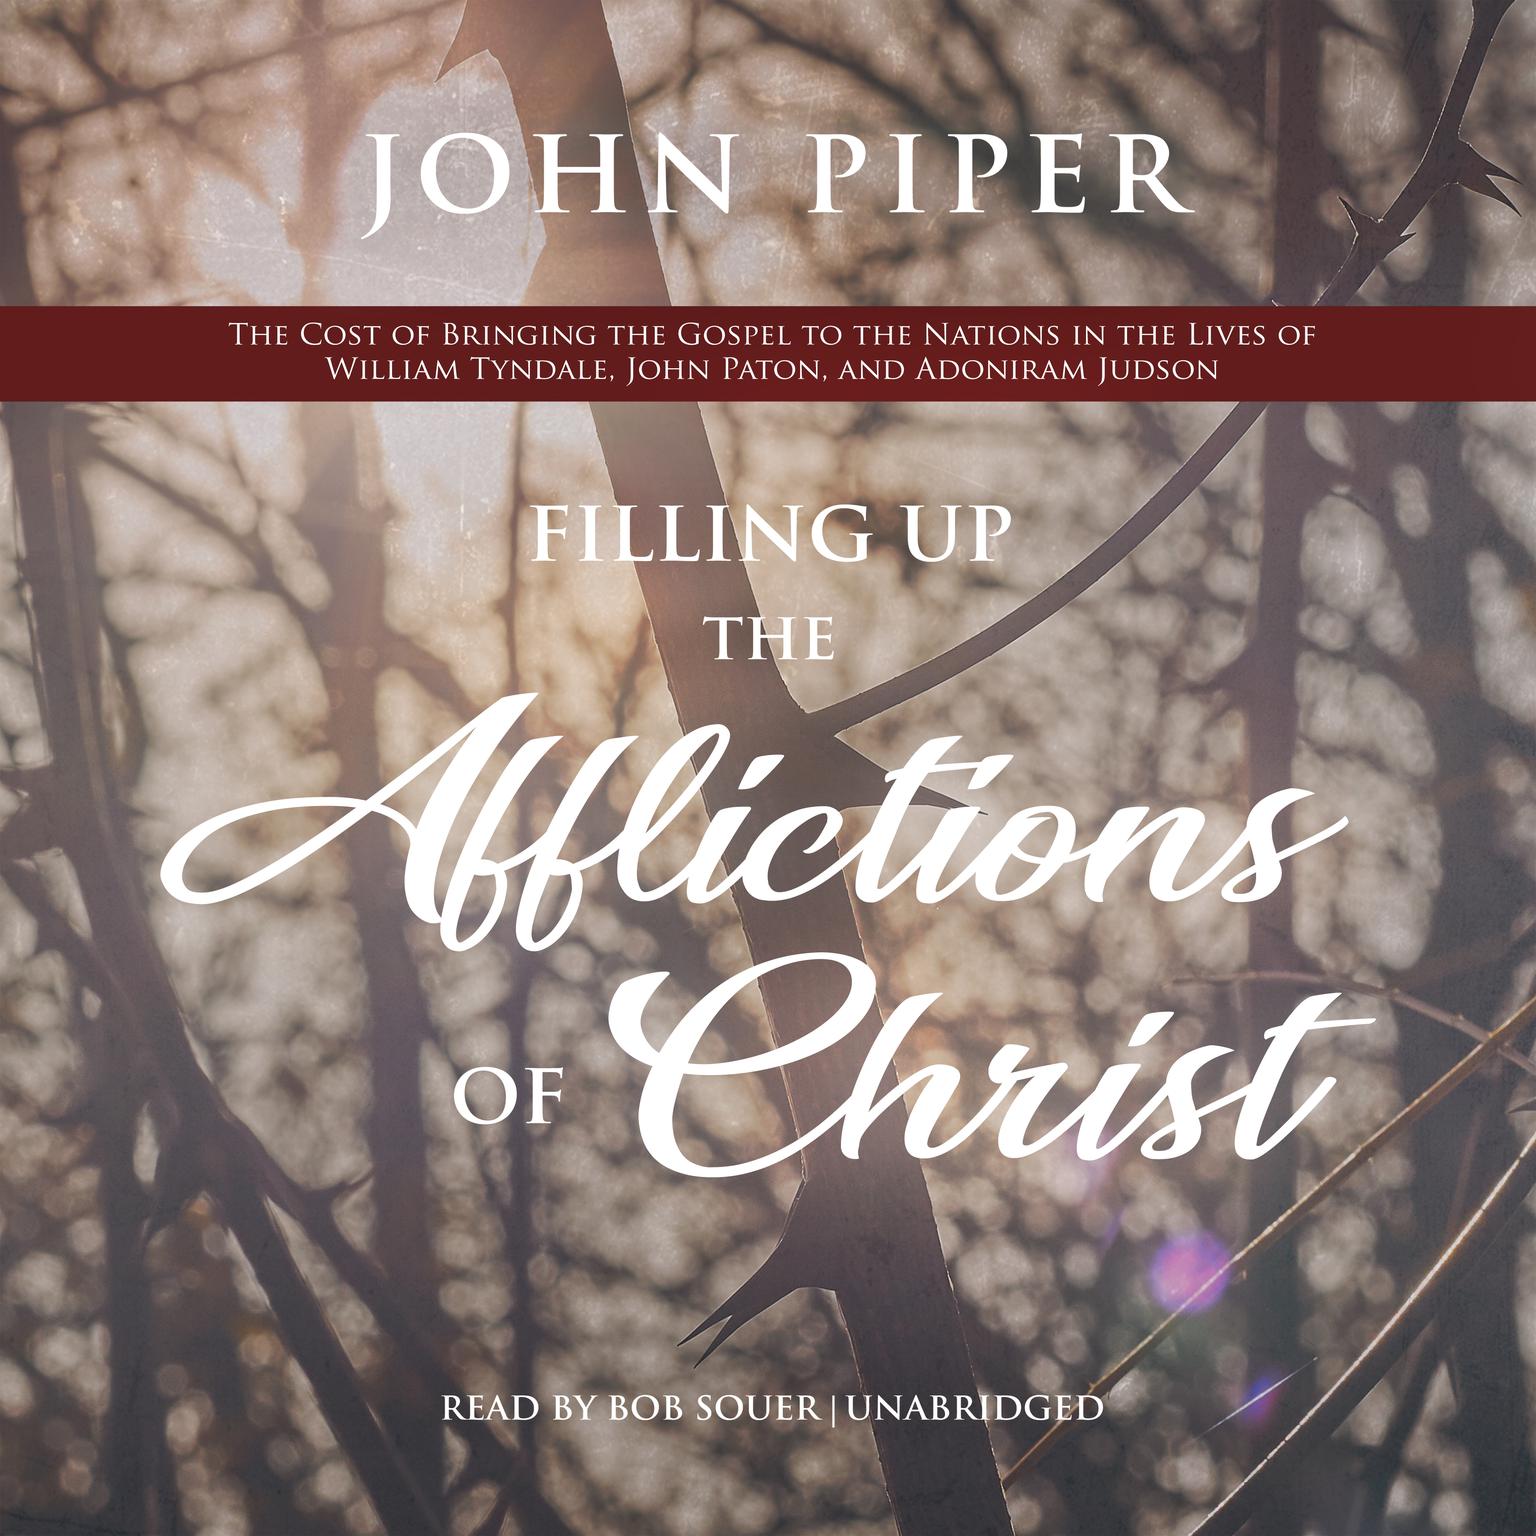 Filling Up the Afflictions of Christ: The Cost of Bringing the Gospel to the Nations in the Lives of William Tyndale, John Paton, and Adoniram Judson Audiobook, by John Piper